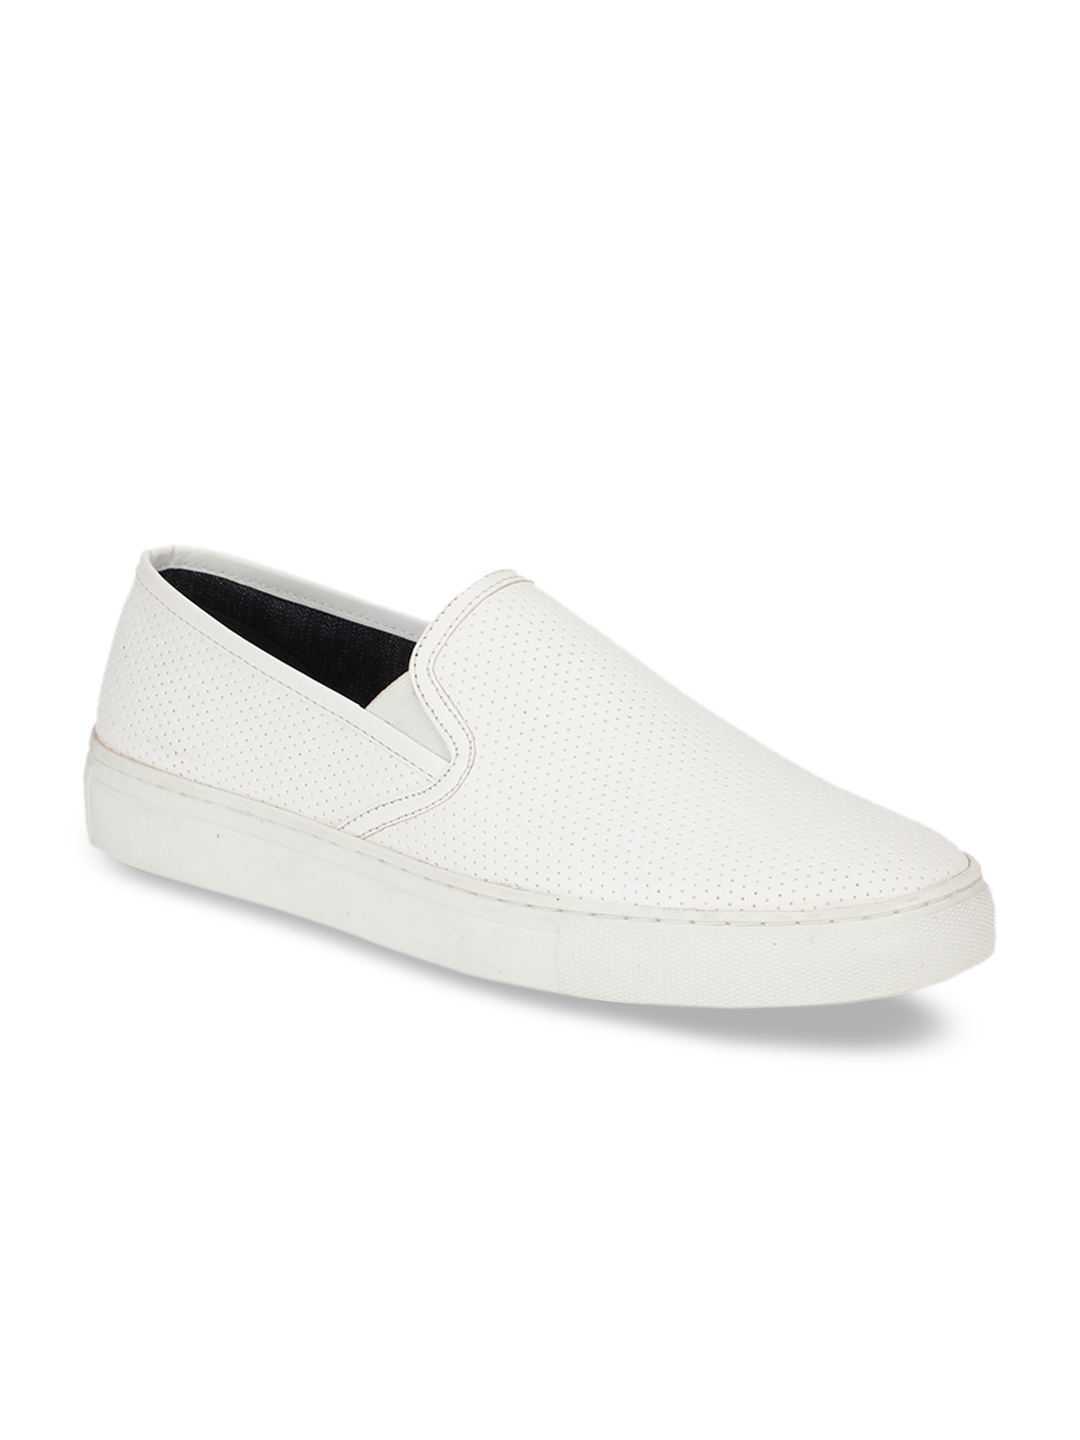 Buy People Men White Slip On Sneakers - Casual Shoes for Men 10541526 ...